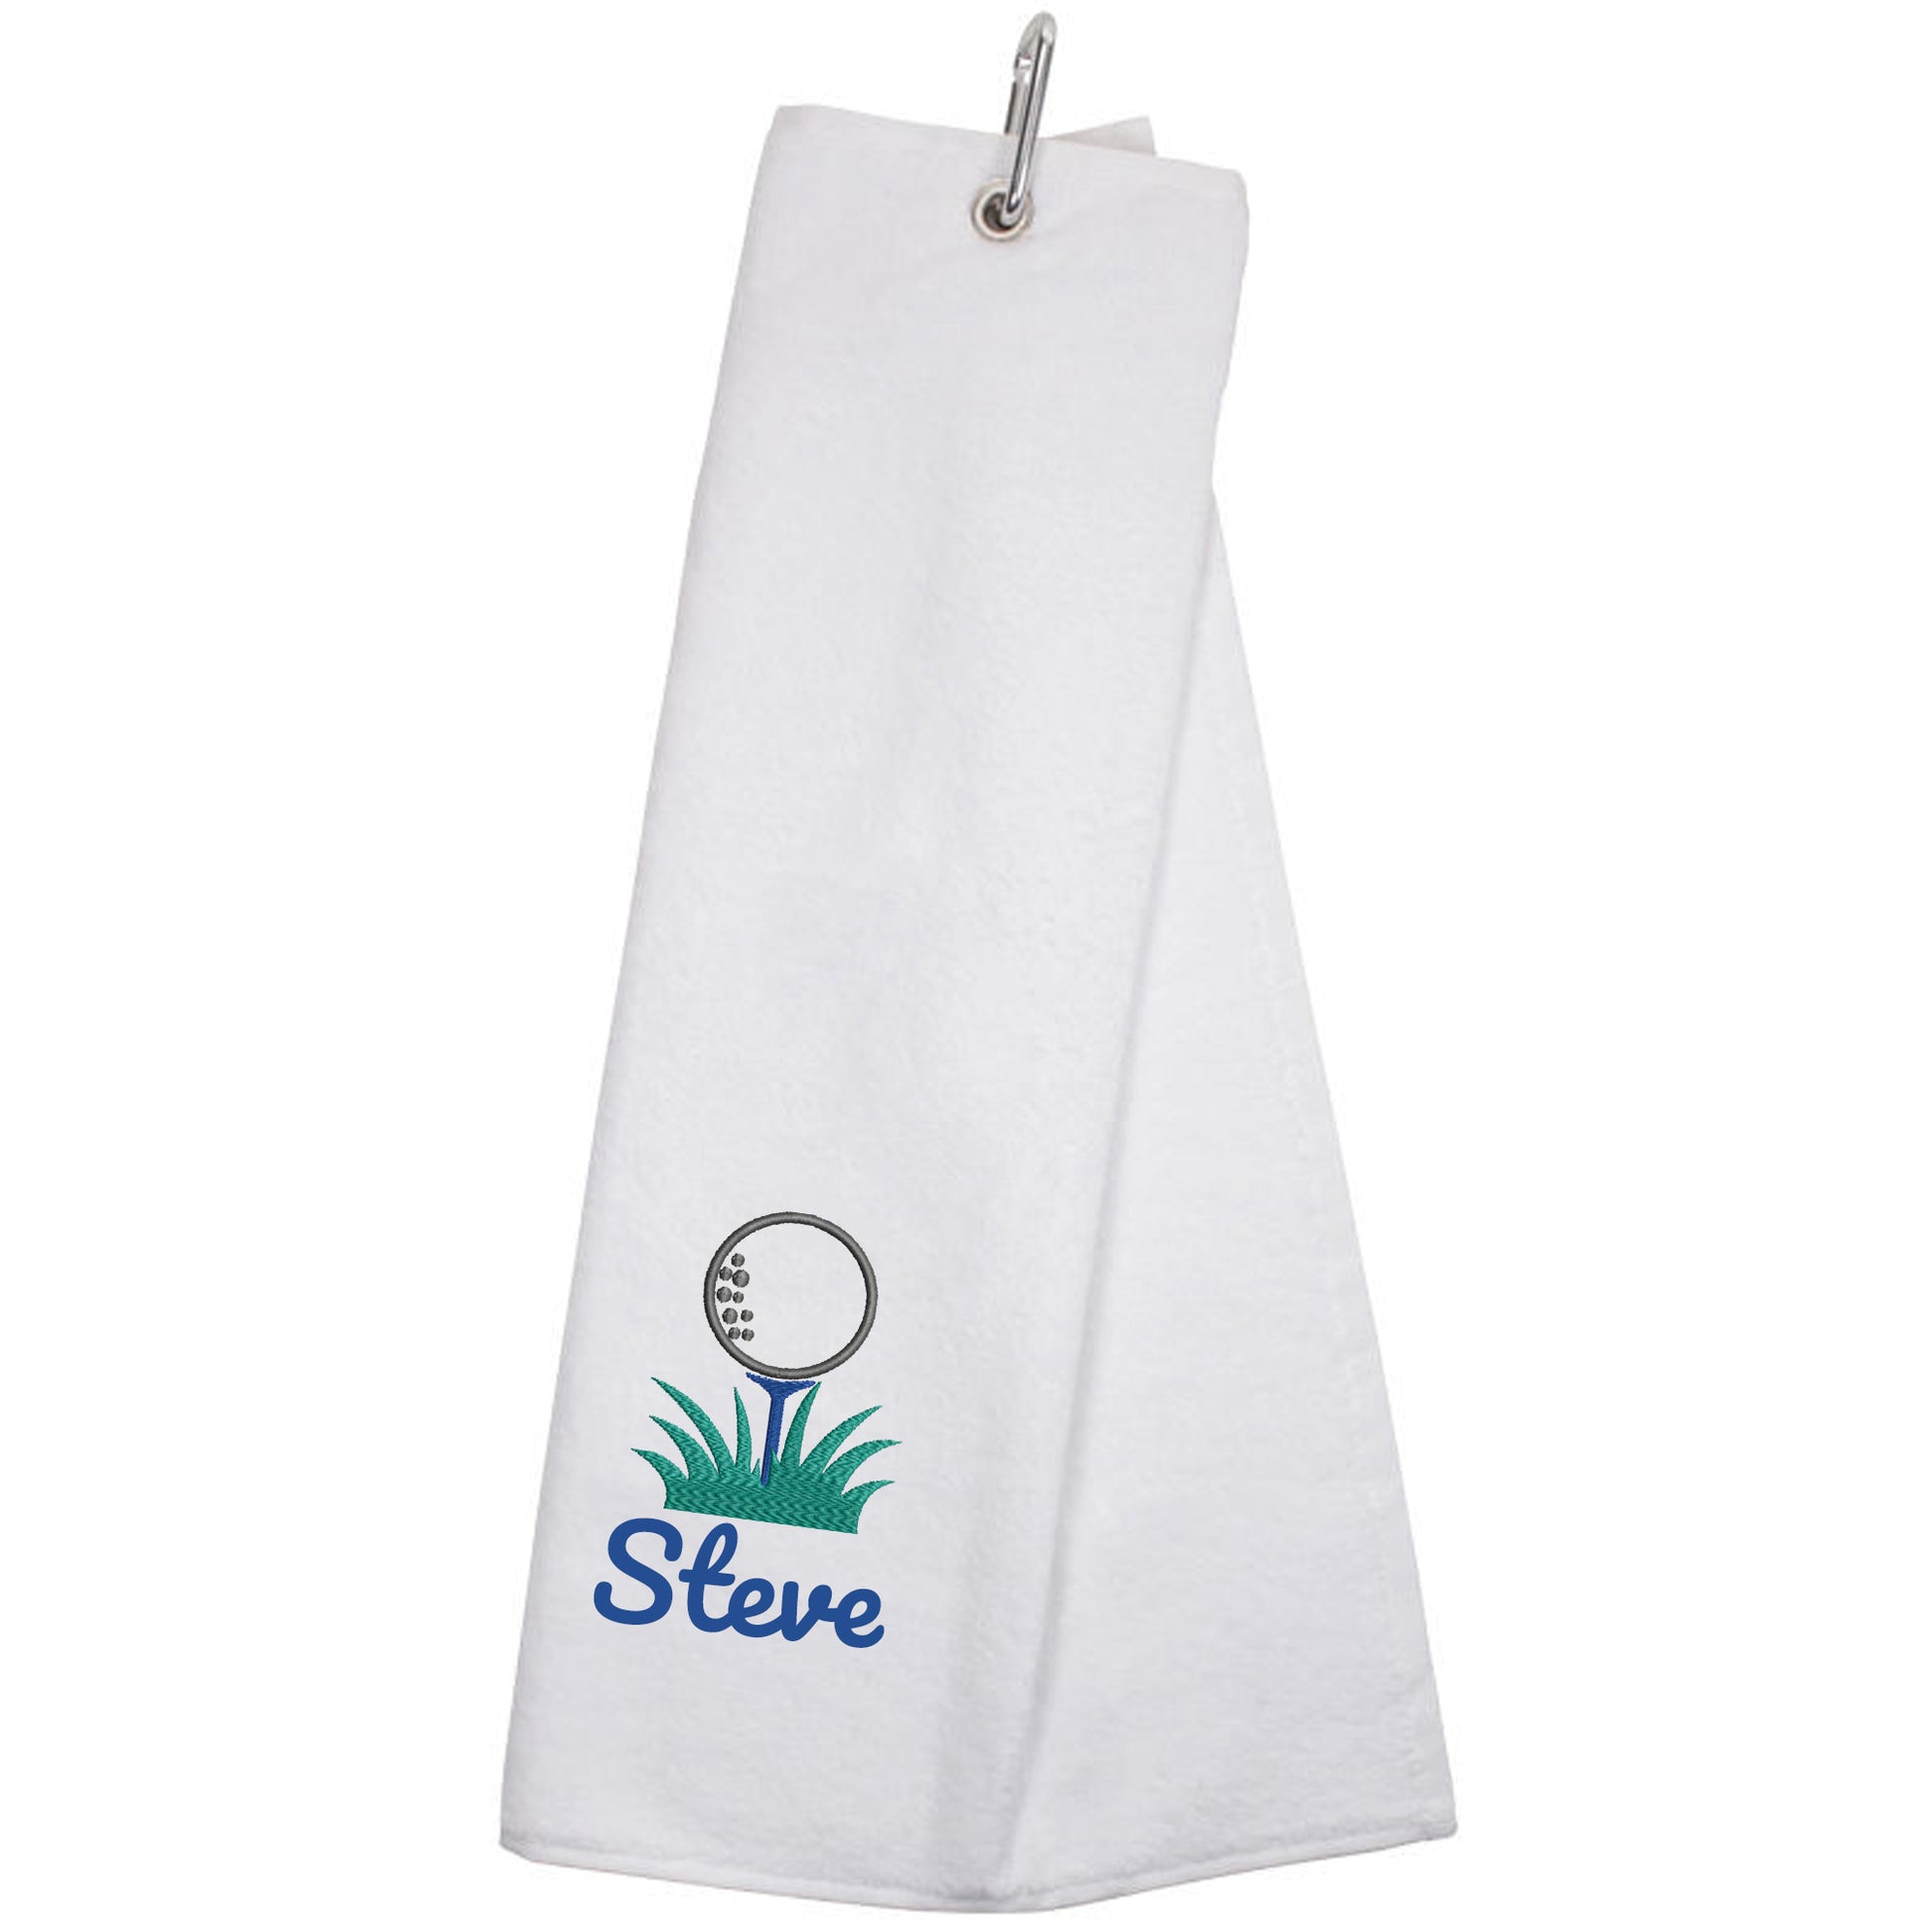 Personalised Embroidered Tri Fold GOLF Towel Trifold Towel with Carabiner Clip  - Always Looking Good - White  